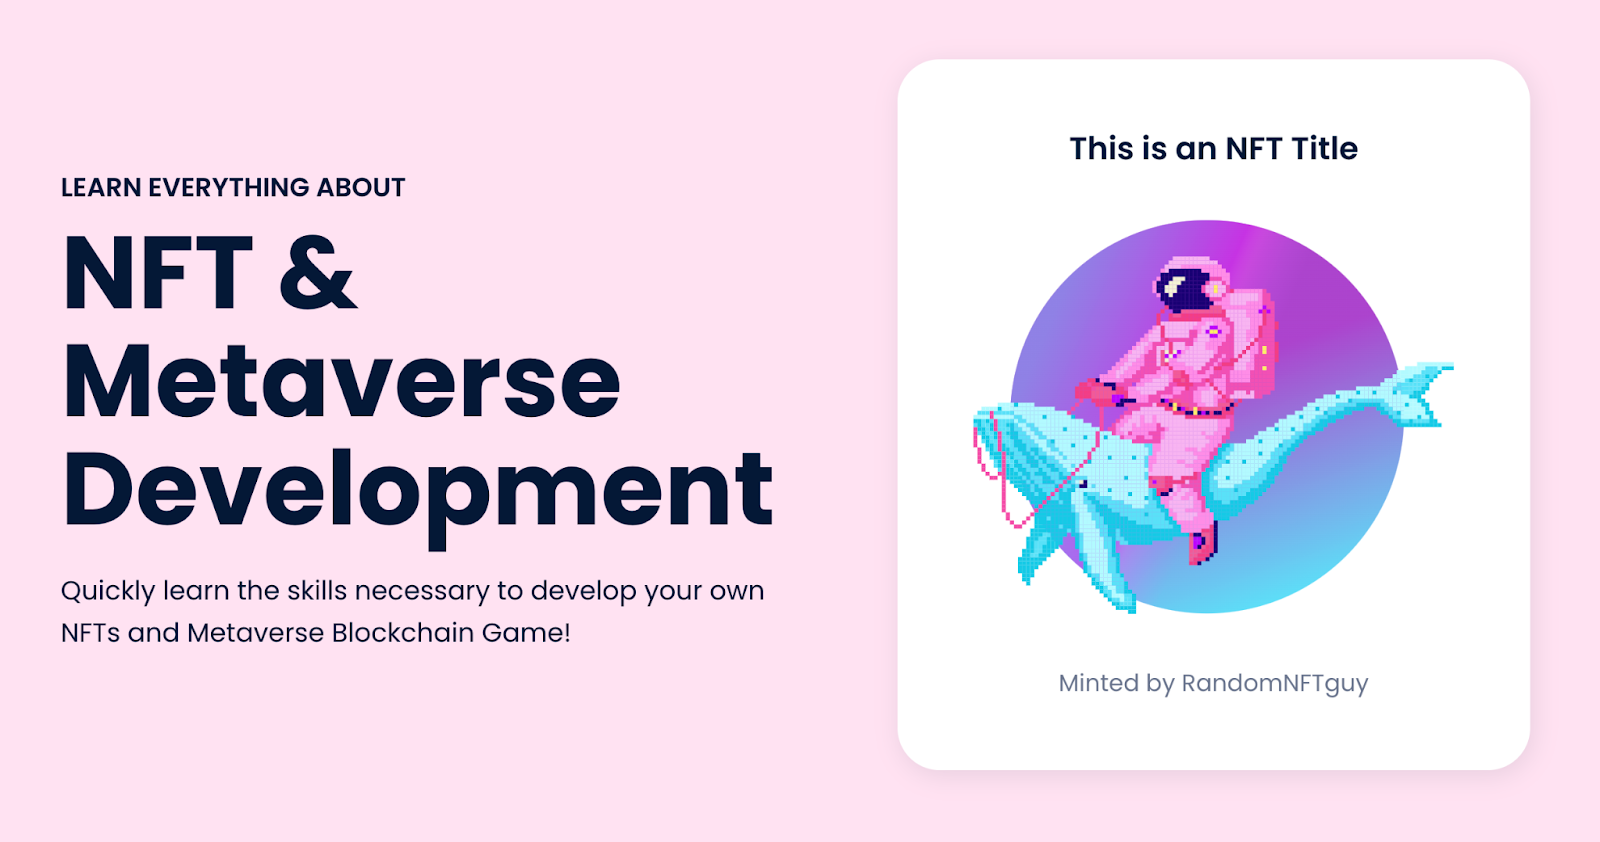 Pink background with a black title stating "NFT & Metaverse Development". Also shown is an NFT with a scuba diver riding a whale.